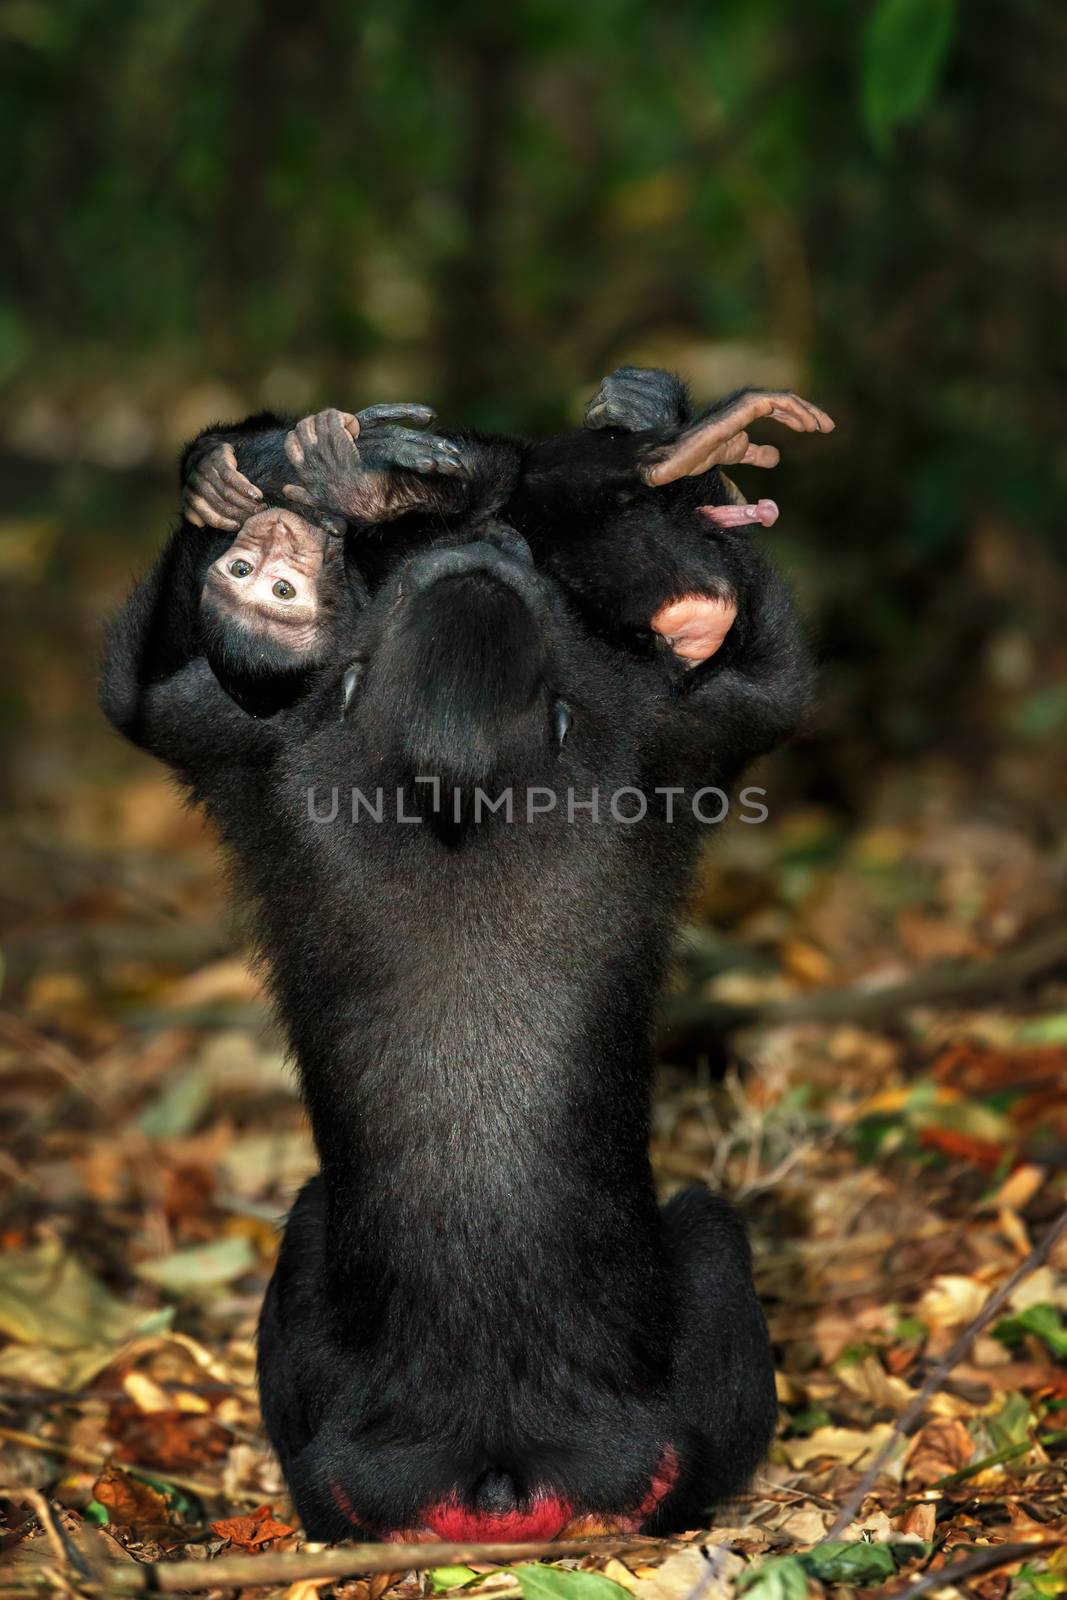 Young baby with mother, endemic monkey Celebes crested macaque known as black monkey (Macaca nigra) in rainforest, Tangkoko Nature Reserve in North Sulawesi, Indonesia wildlife